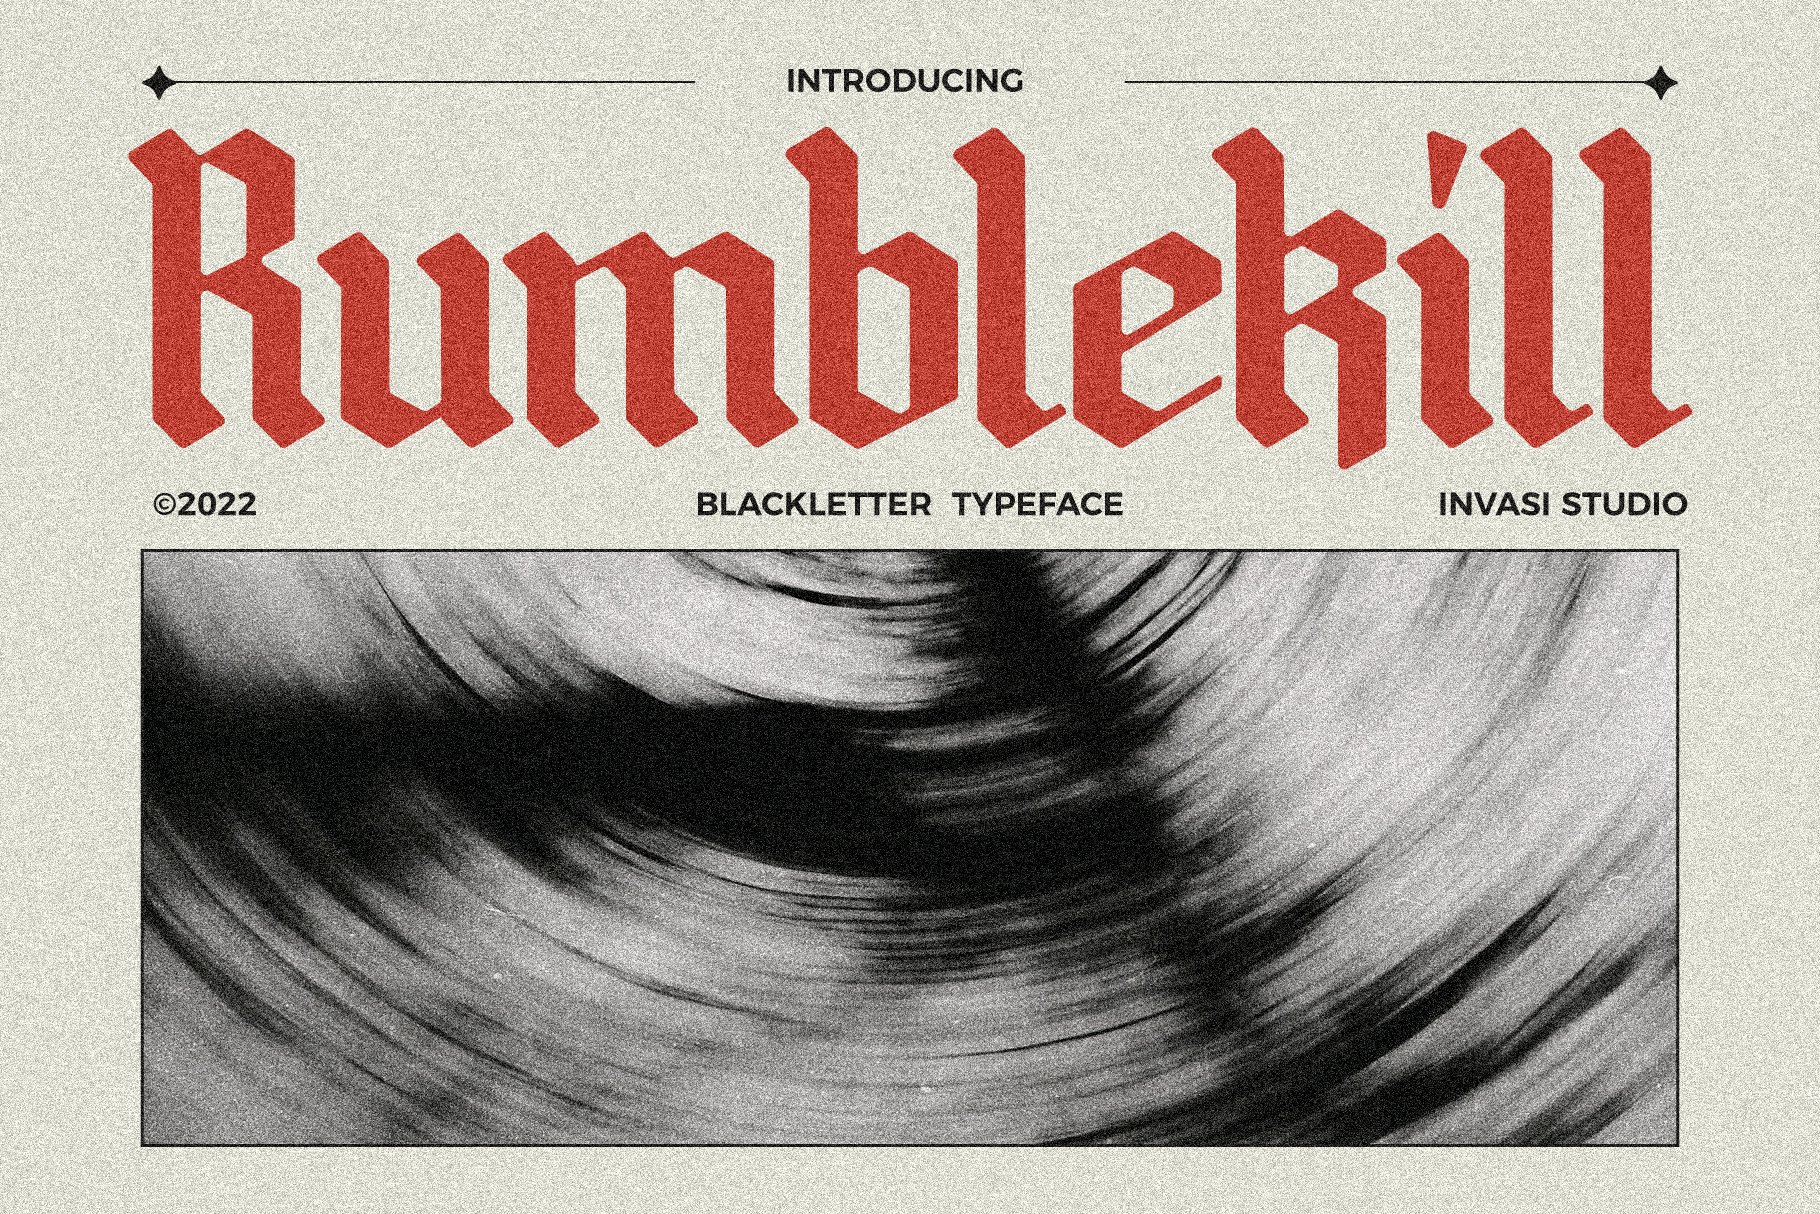 Rumblekill - Rounded Blackletter cover image.